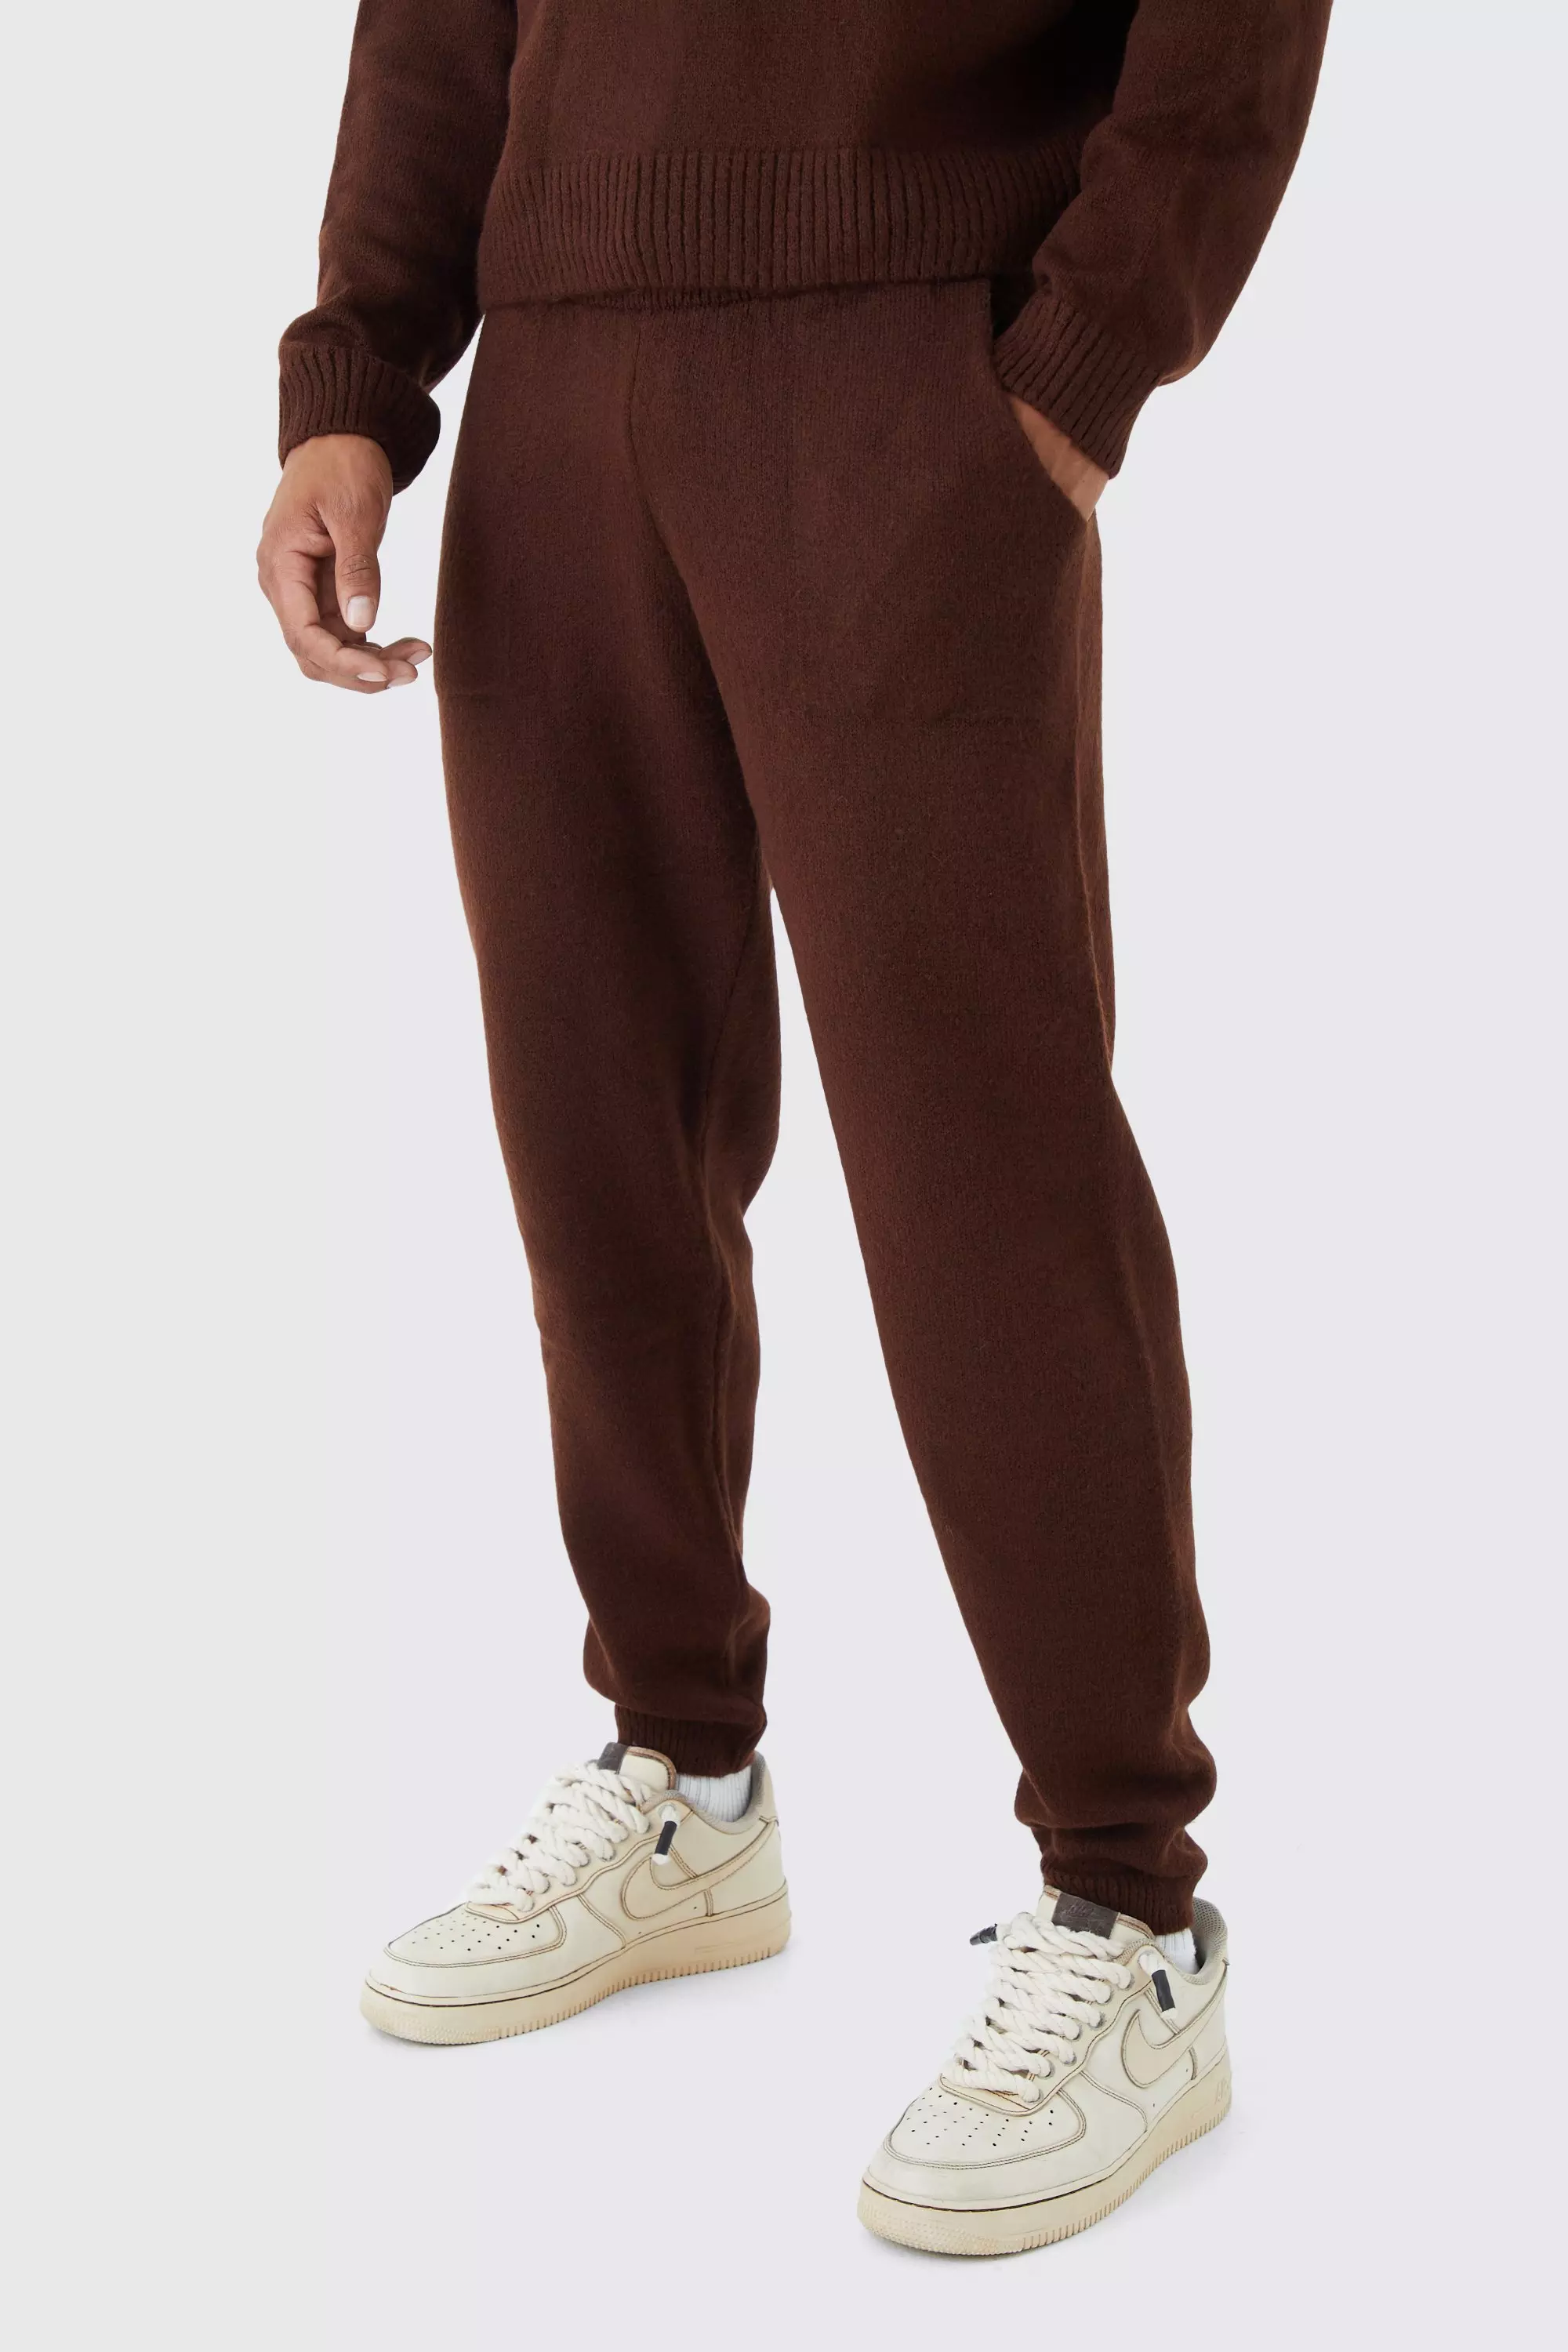 Relaxed Fit Fleece joggers - Brown - Men